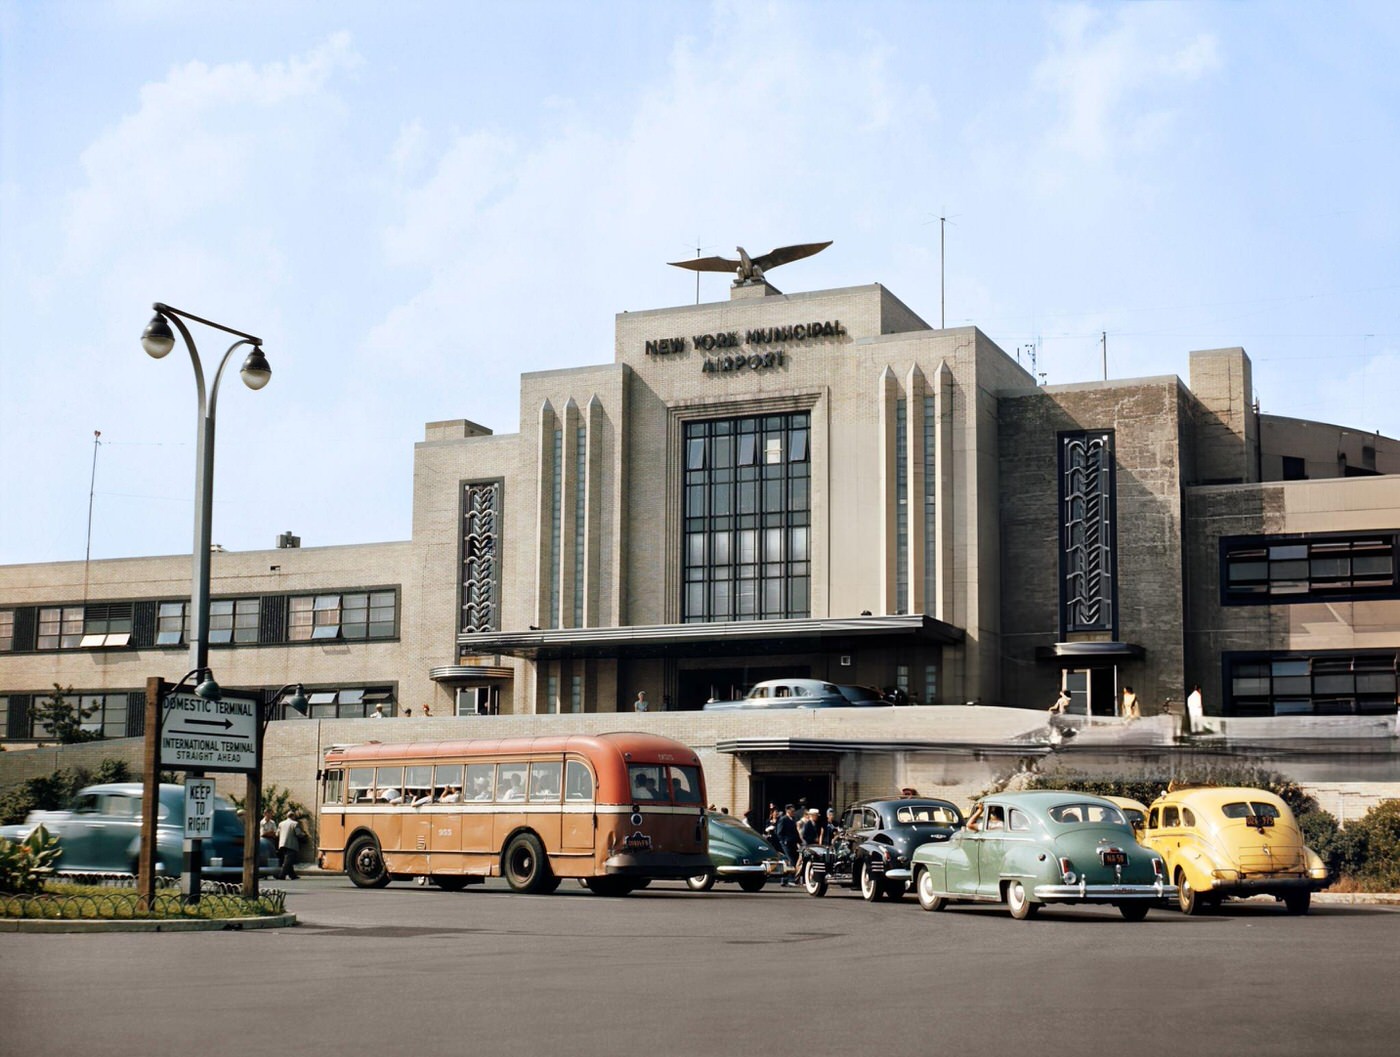 Buses, Taxis, And Cars Outside The Main Building Of Laguardia Airport In Queens, New York City, 1940S.